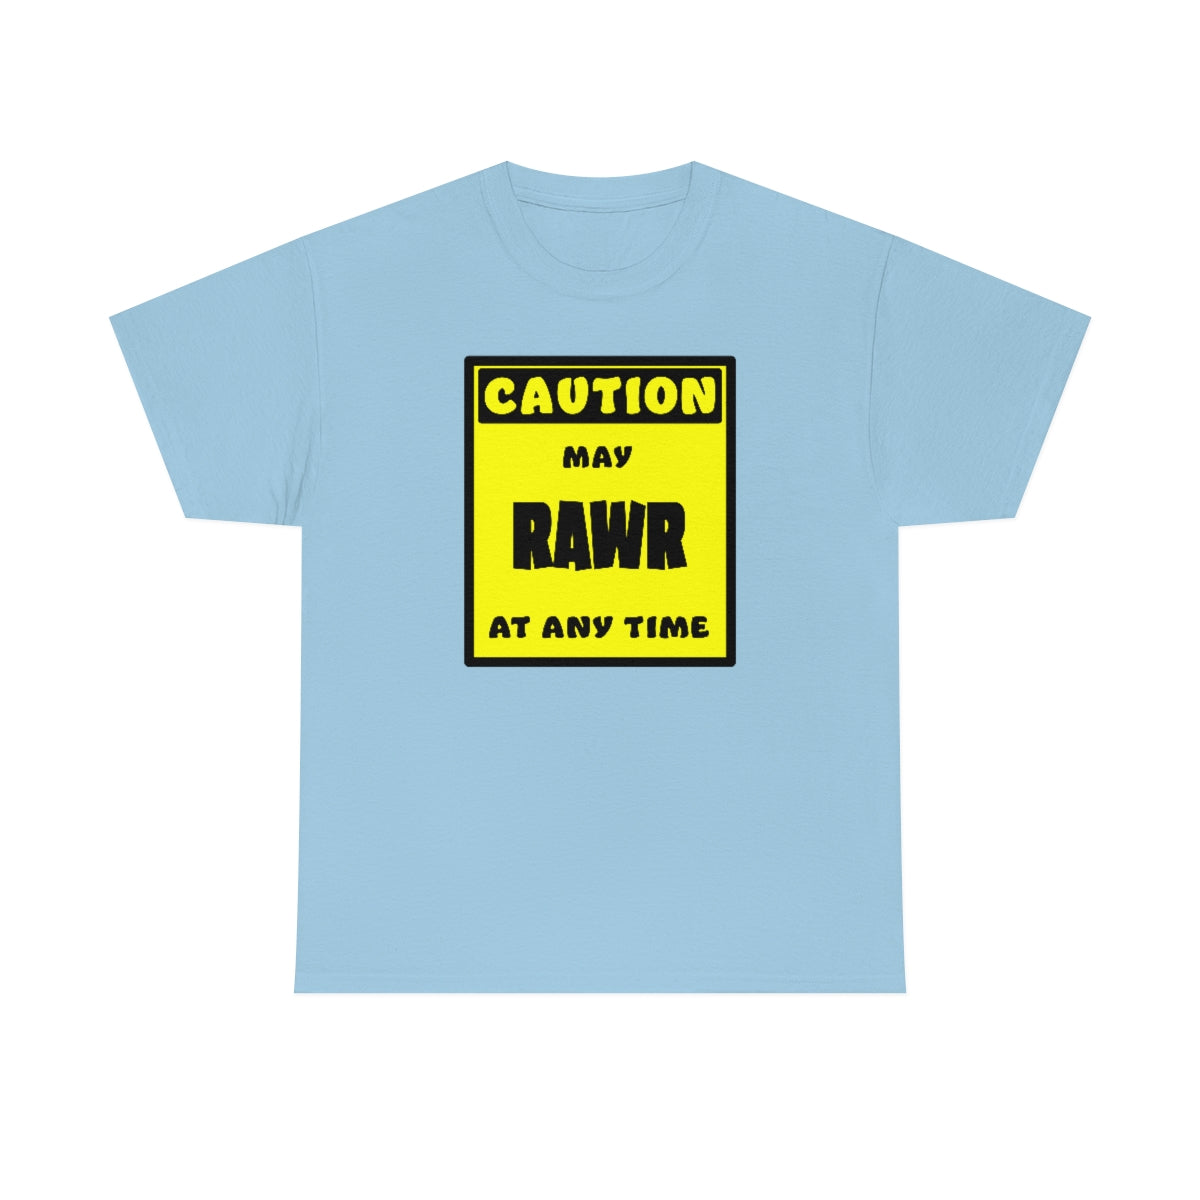 CAUTION! May RAWR at any time! - T-Shirt T-Shirt Artworktee Light Blue S 